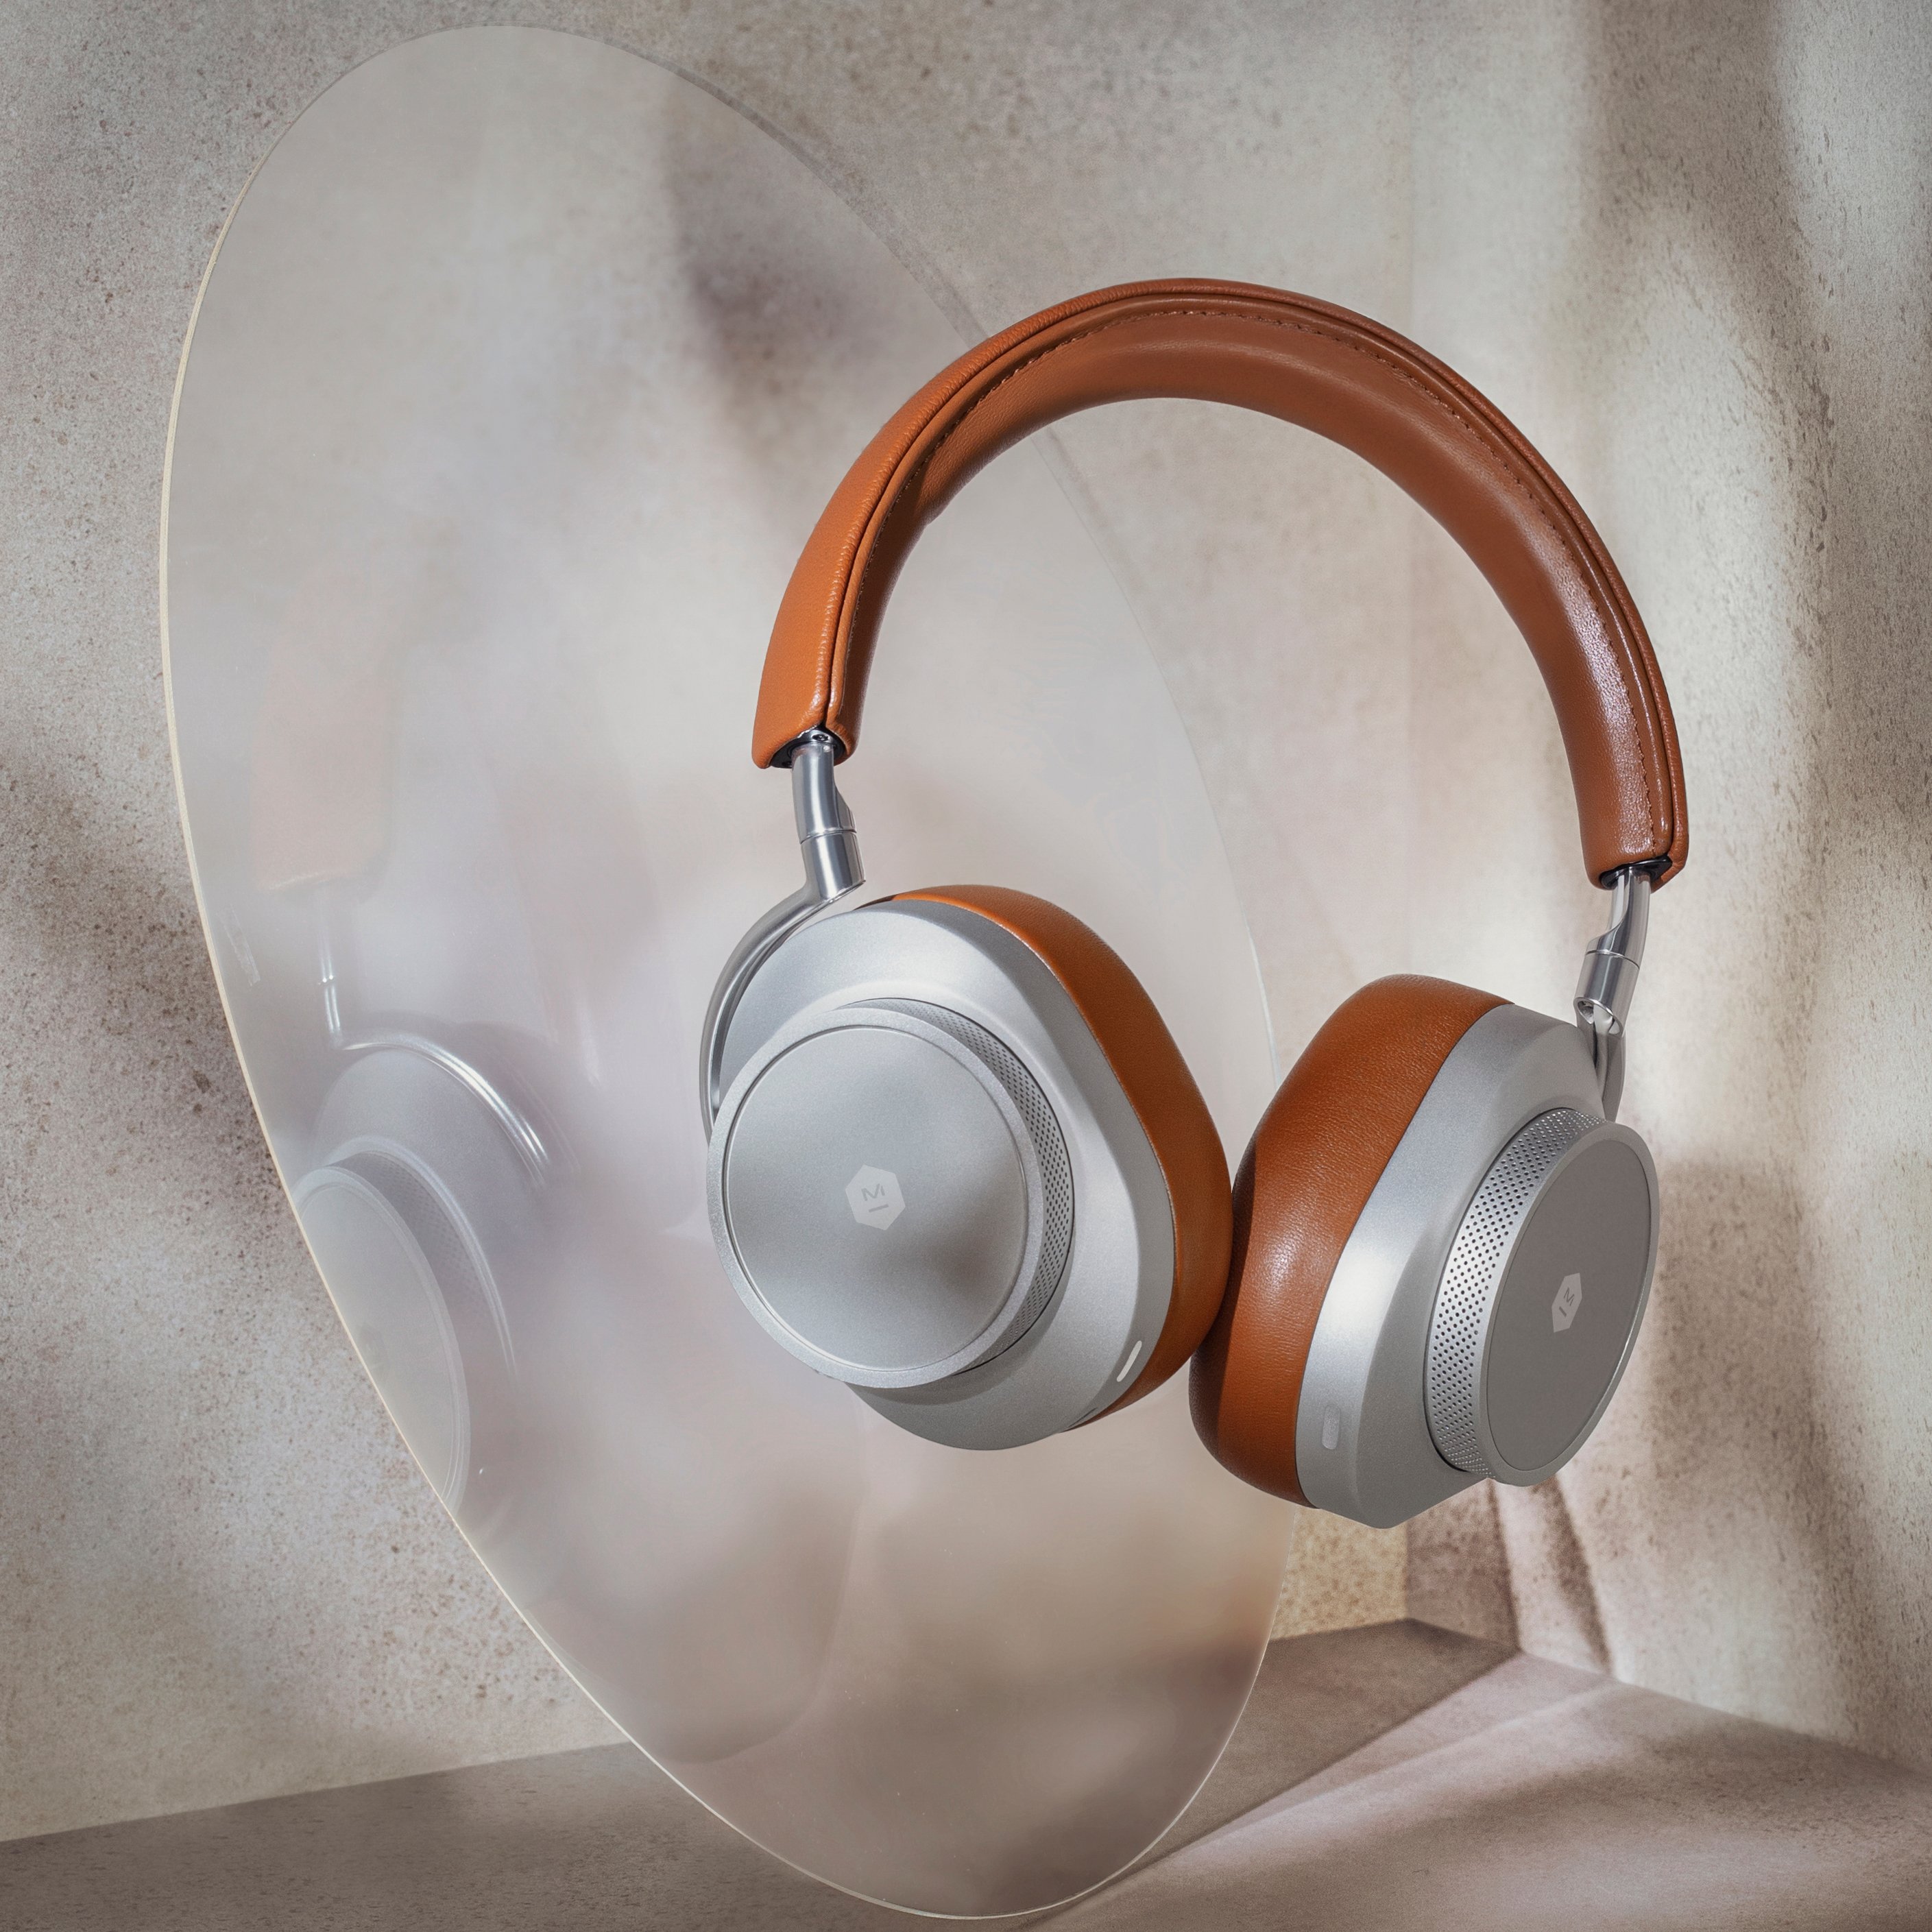 Introducing MW75 Active Noise-Cancelling Wireless Headphones